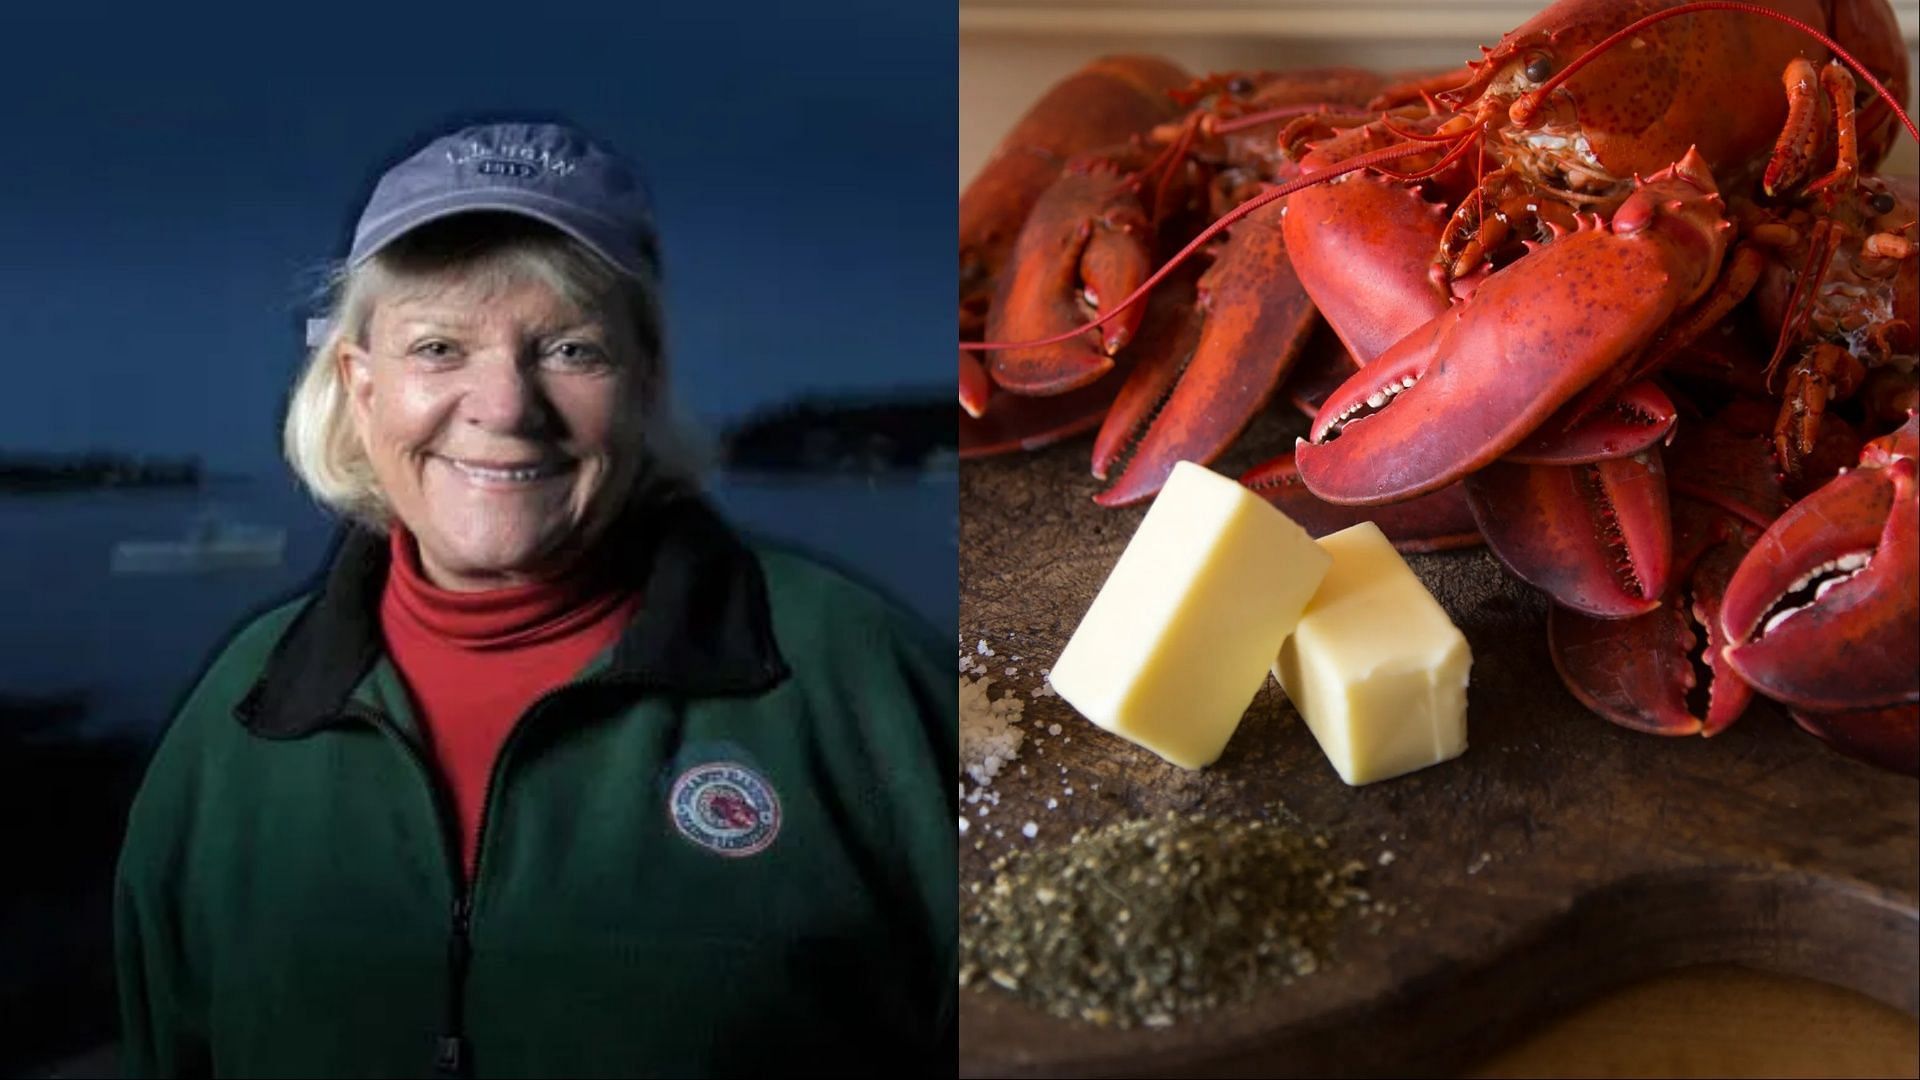  Linda Bean, the owner of Maine Lobster, Inc, has recently died (Image via linda beans maine lobster)